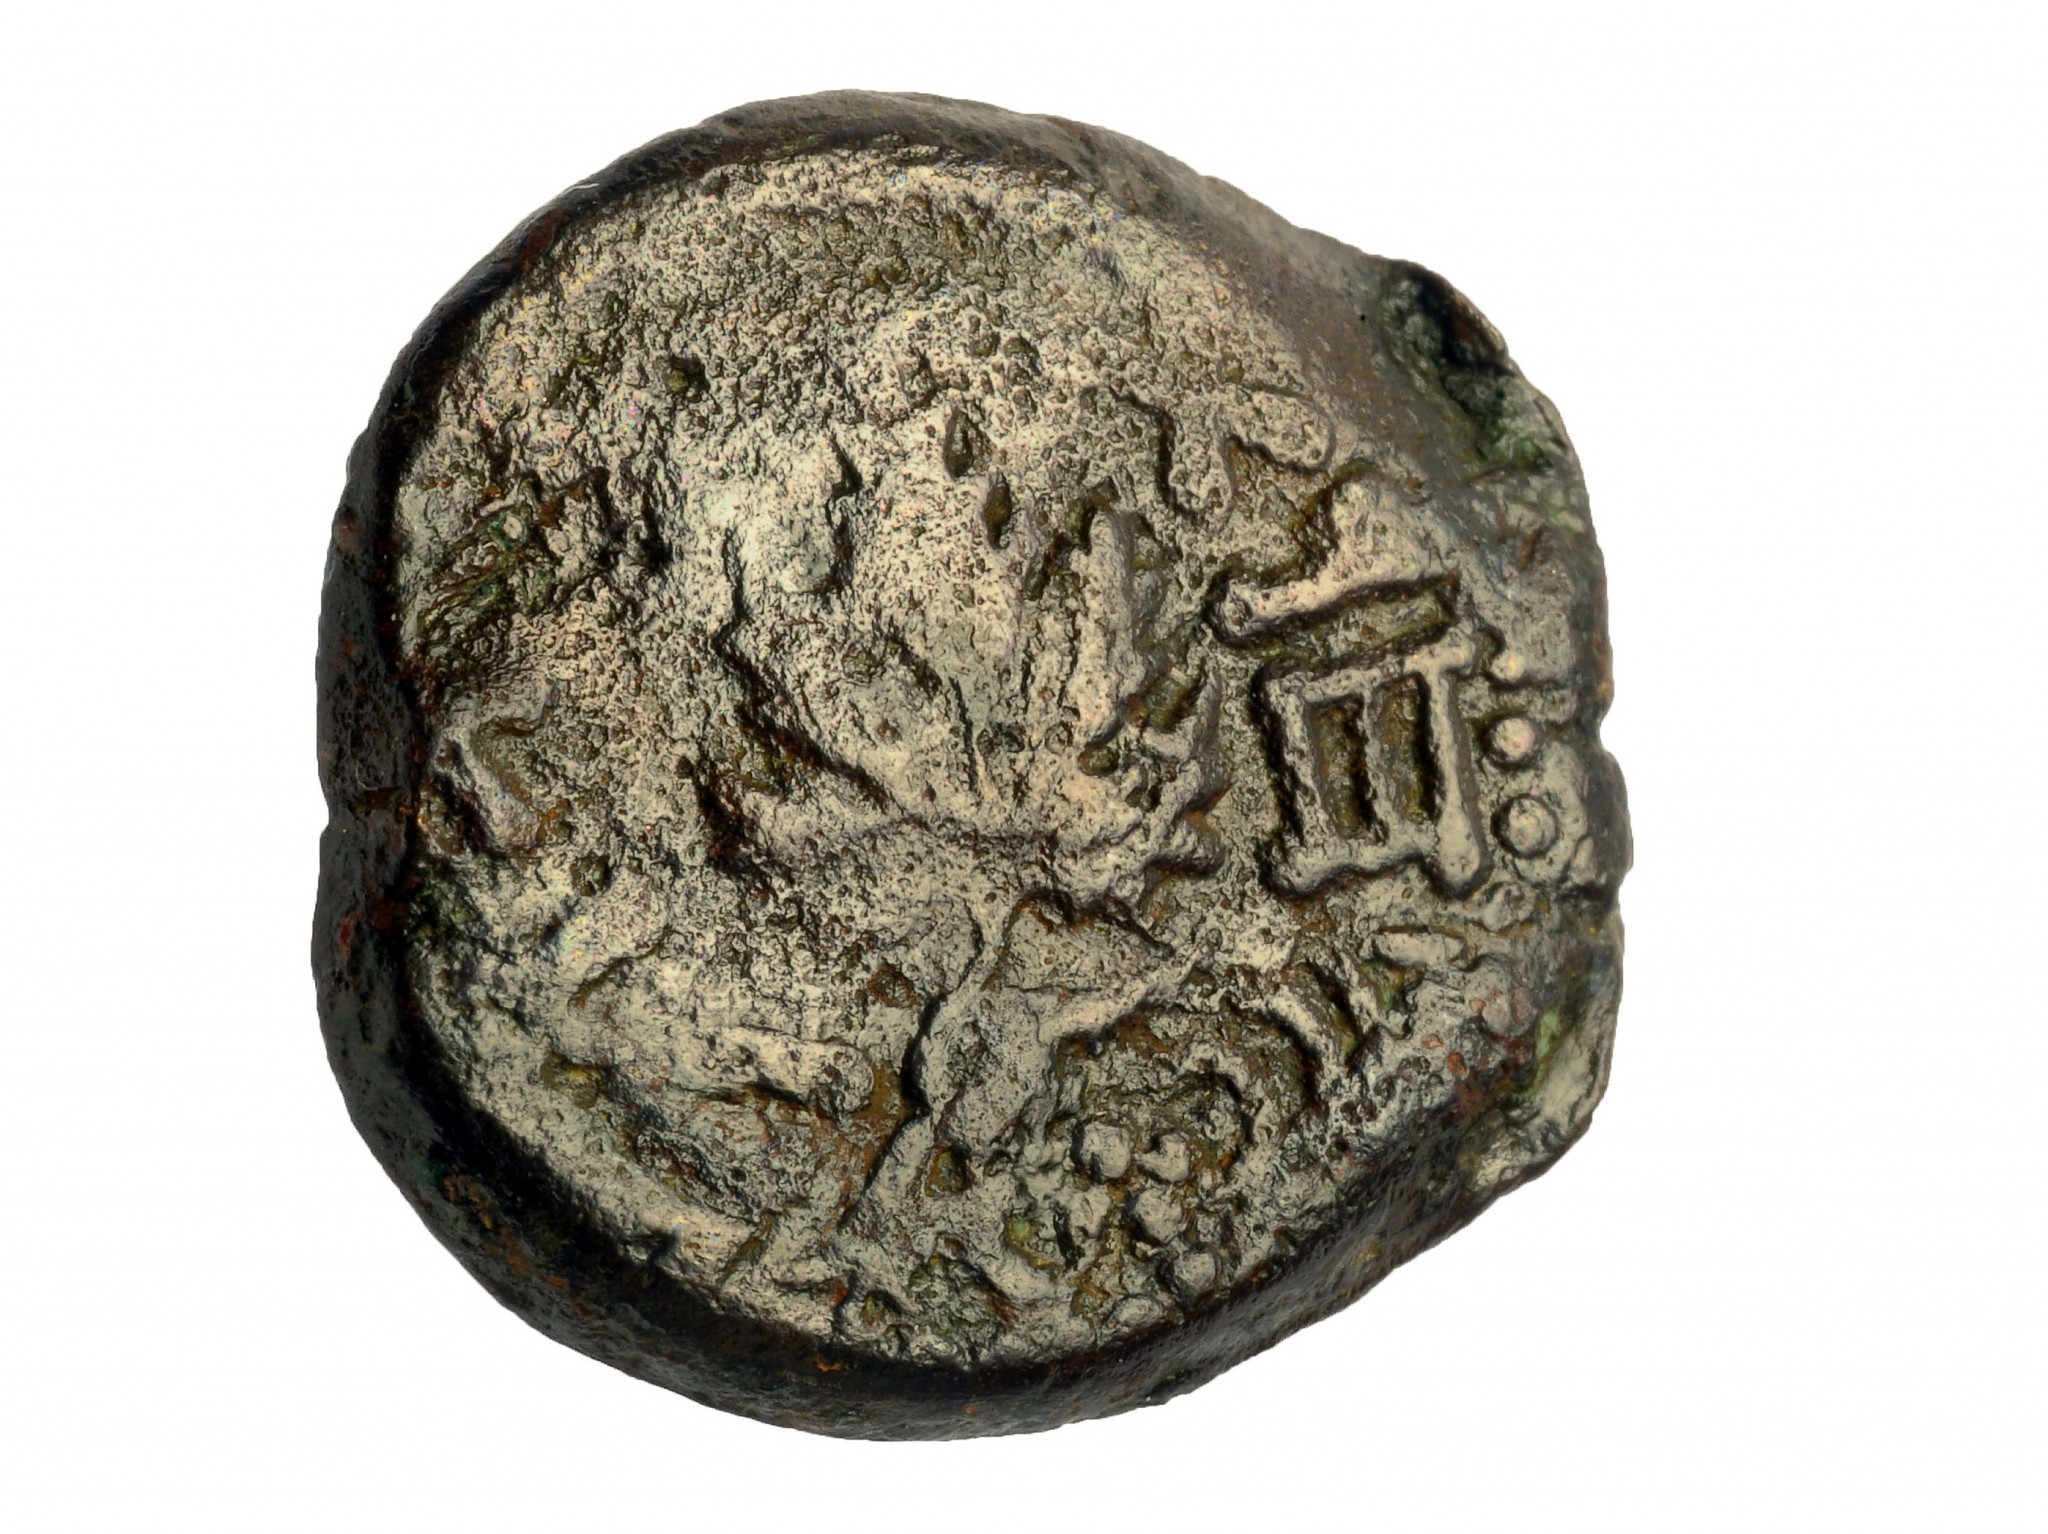 Coin from the period of the Great Revolt against the Romans, discovered in the destruction layer atop the street from the Second Temple period.  Photo: Carla Amit, courtesy of the Israel Antiquities Authority.